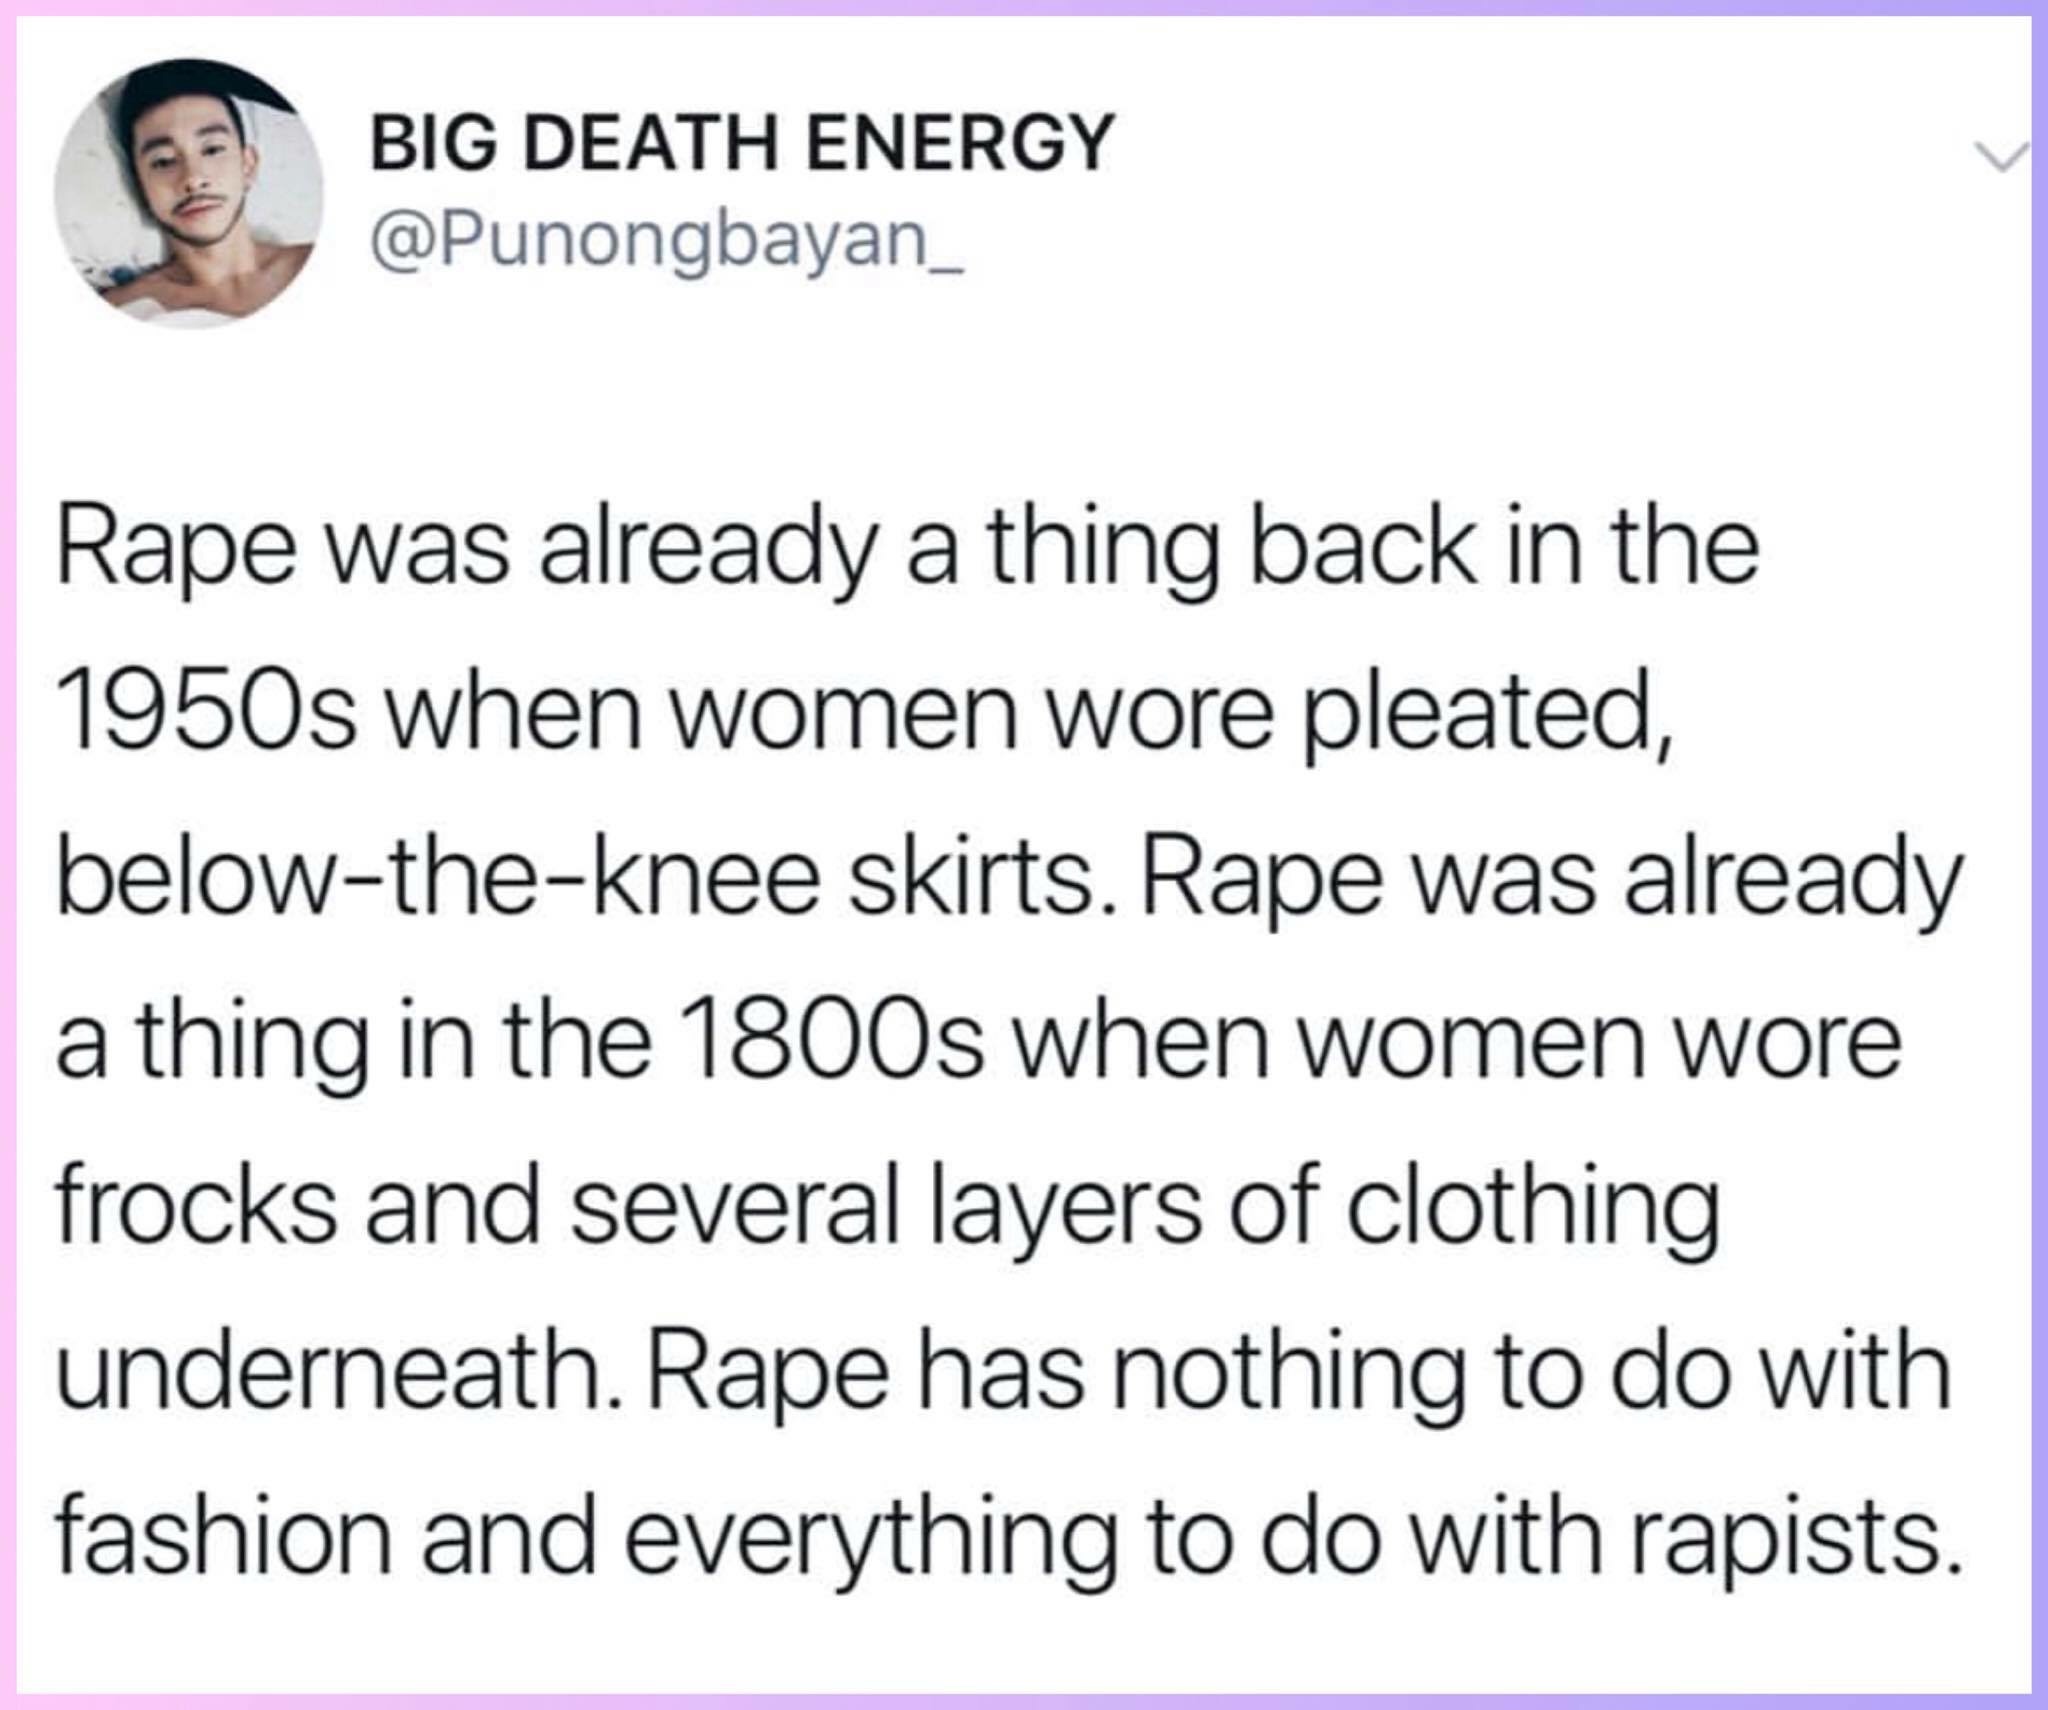 document - Big Death Energy Rape was already a thing back in the 1950s when women wore pleated, belowtheknee skirts. Rape was already a thing in the 1800s when women wore frocks and several layers of clothing underneath. Rape has nothing to do with fashio